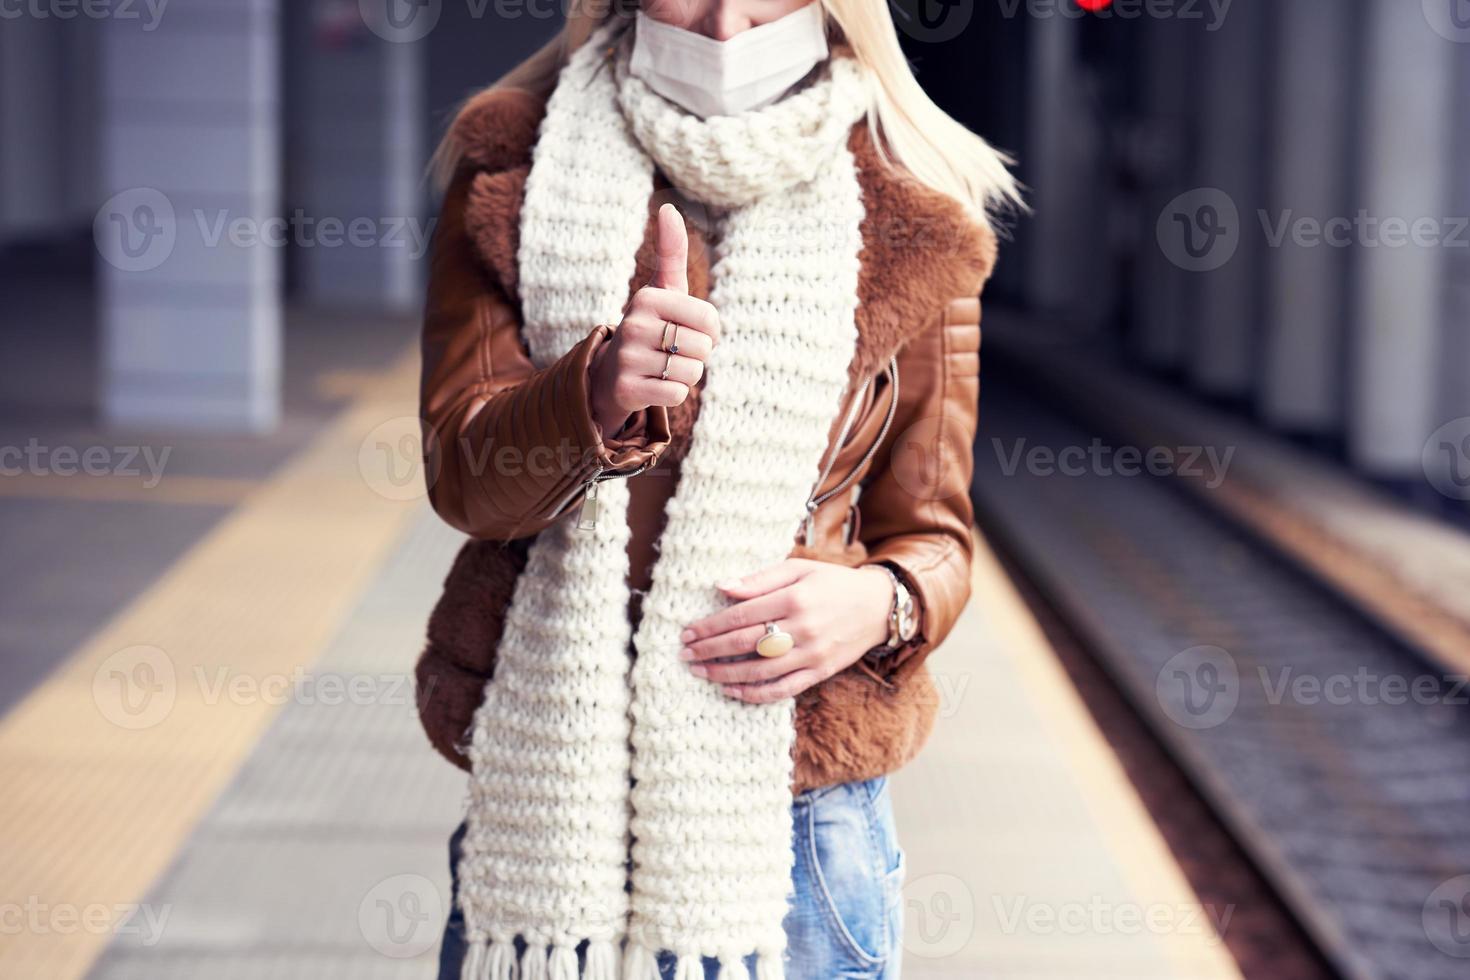 Adult woman at train station wearing masks due to covid-19 restrictions photo